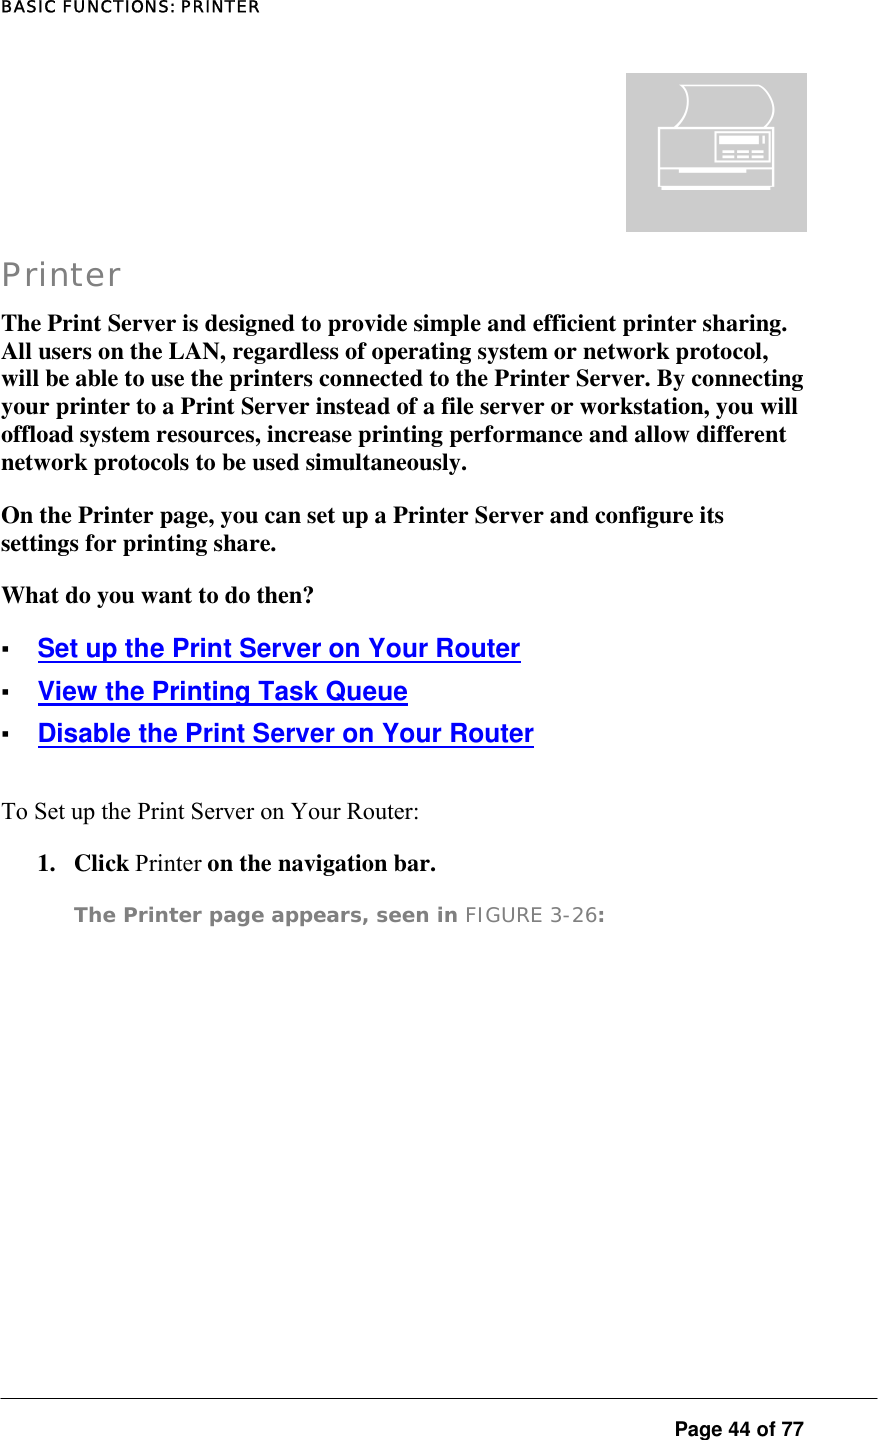 BASIC FUNCTIONS: PRINTER  Page 44 of 77 Printer The Print Server is designed to provide simple and efficient printer sharing. All users on the LAN, regardless of operating system or network protocol, will be able to use the printers connected to the Printer Server. By connecting your printer to a Print Server instead of a file server or workstation, you will offload system resources, increase printing performance and allow different network protocols to be used simultaneously.  On the Printer page, you can set up a Printer Server and configure its settings for printing share.  What do you want to do then?  ▪ Set up the Print Server on Your Router ▪ View the Printing Task Queue ▪ Disable the Print Server on Your Router To Set up the Print Server on Your Router:  1. Click Printer on the navigation bar.  The Printer page appears, seen in FIGURE 3-26:   ¬ 